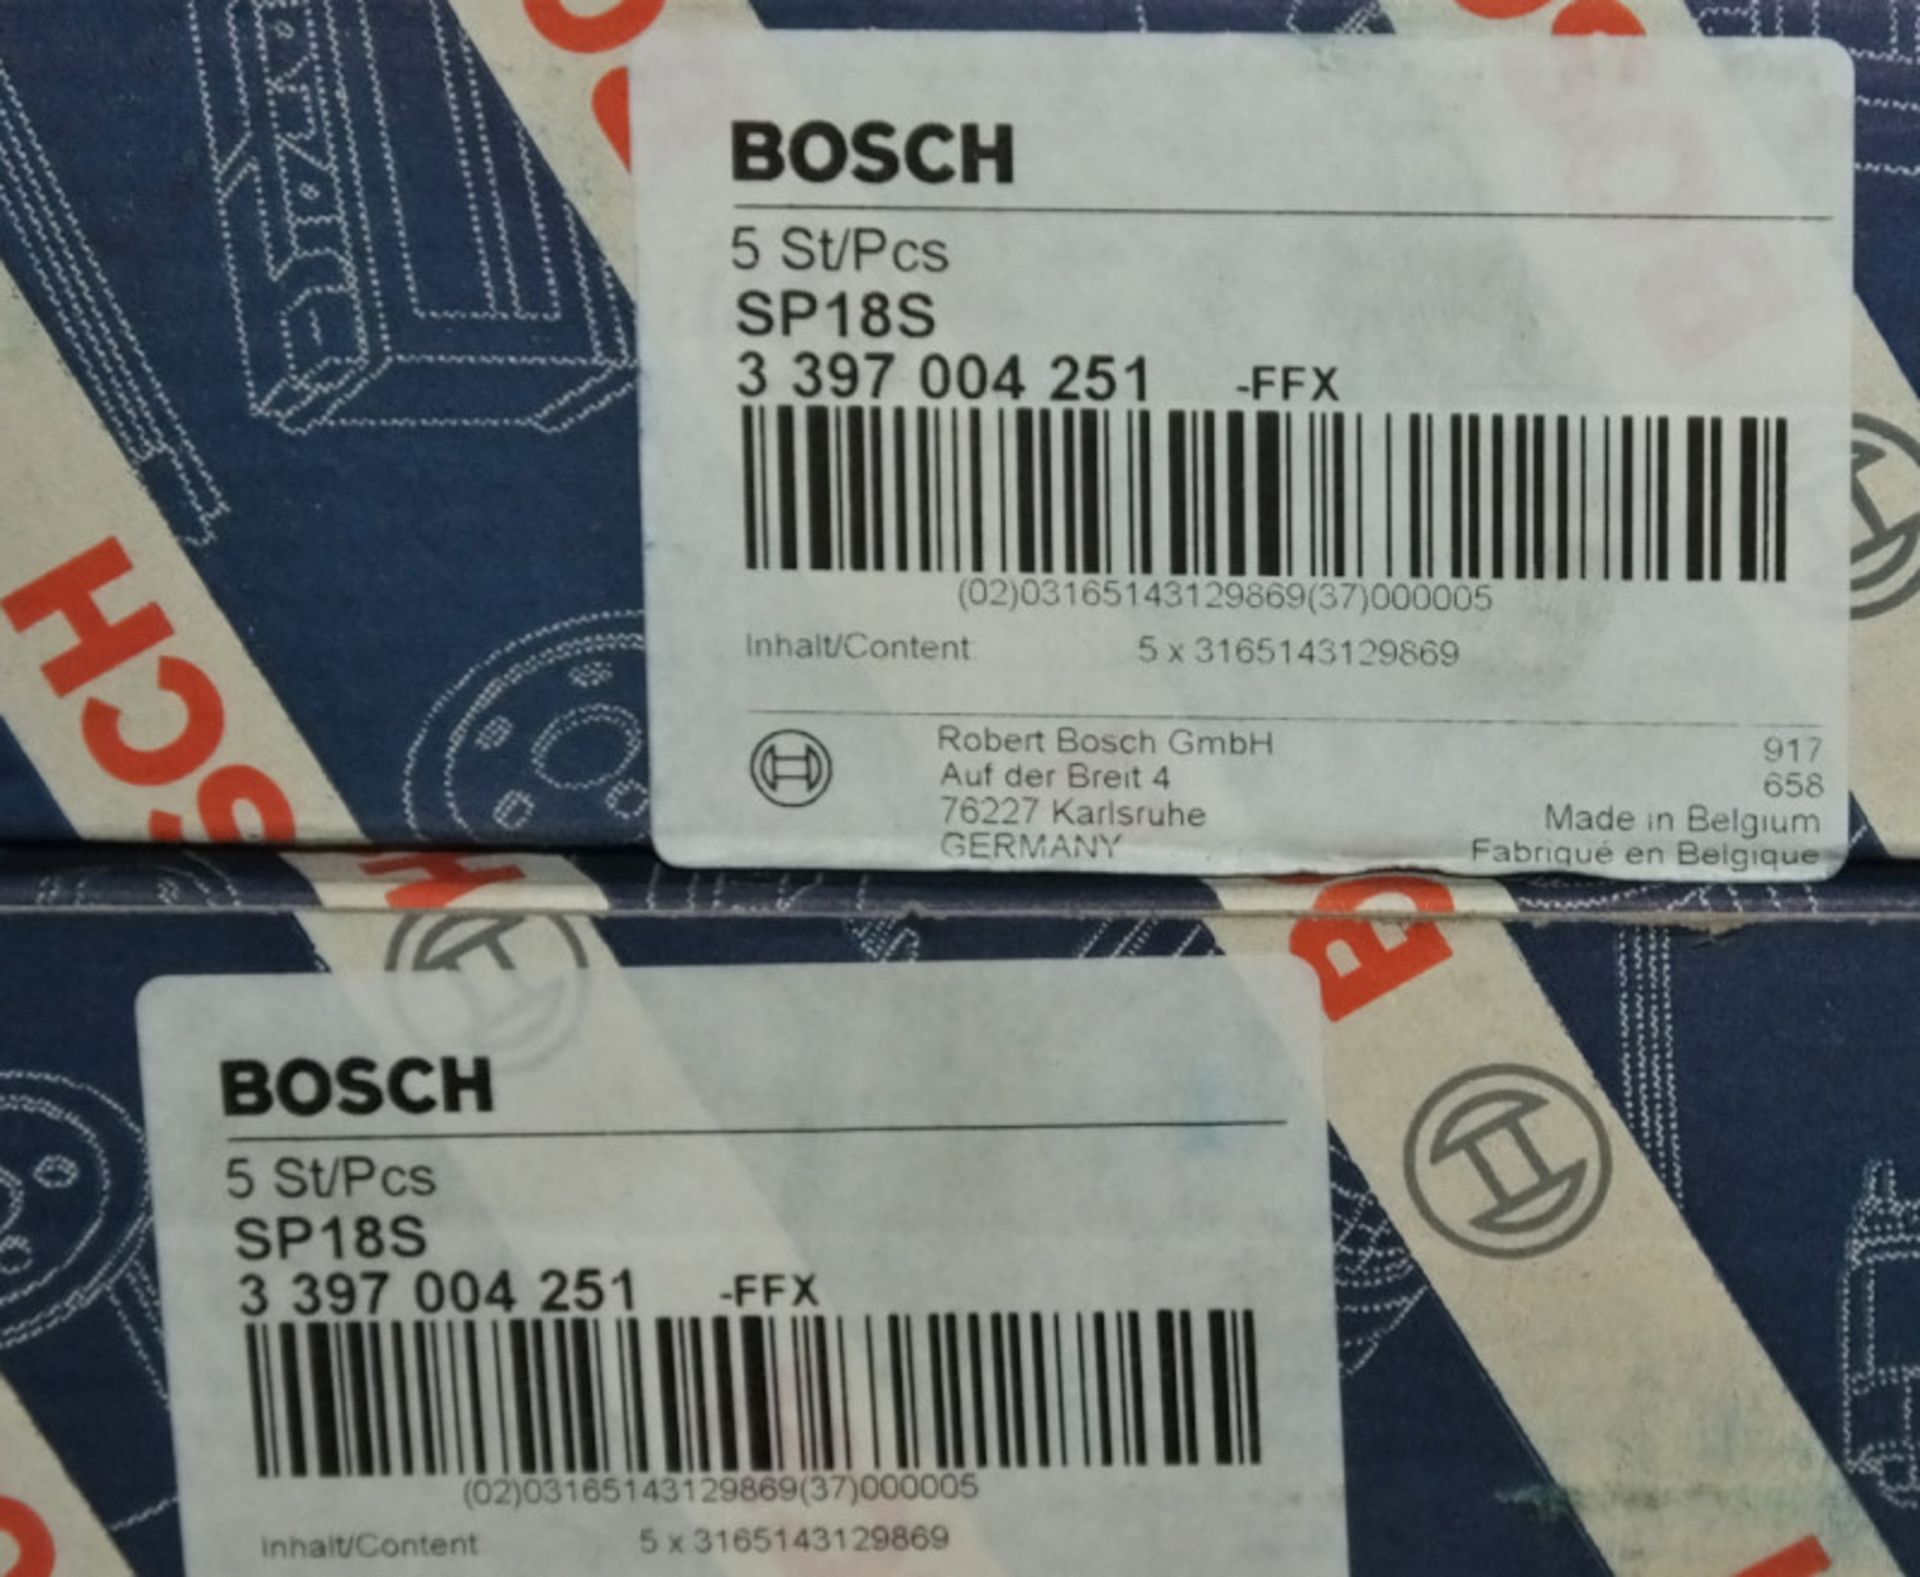 Bosch Wiper Blade Assortment - Please check pictures for example of sizes and model number - Image 3 of 4